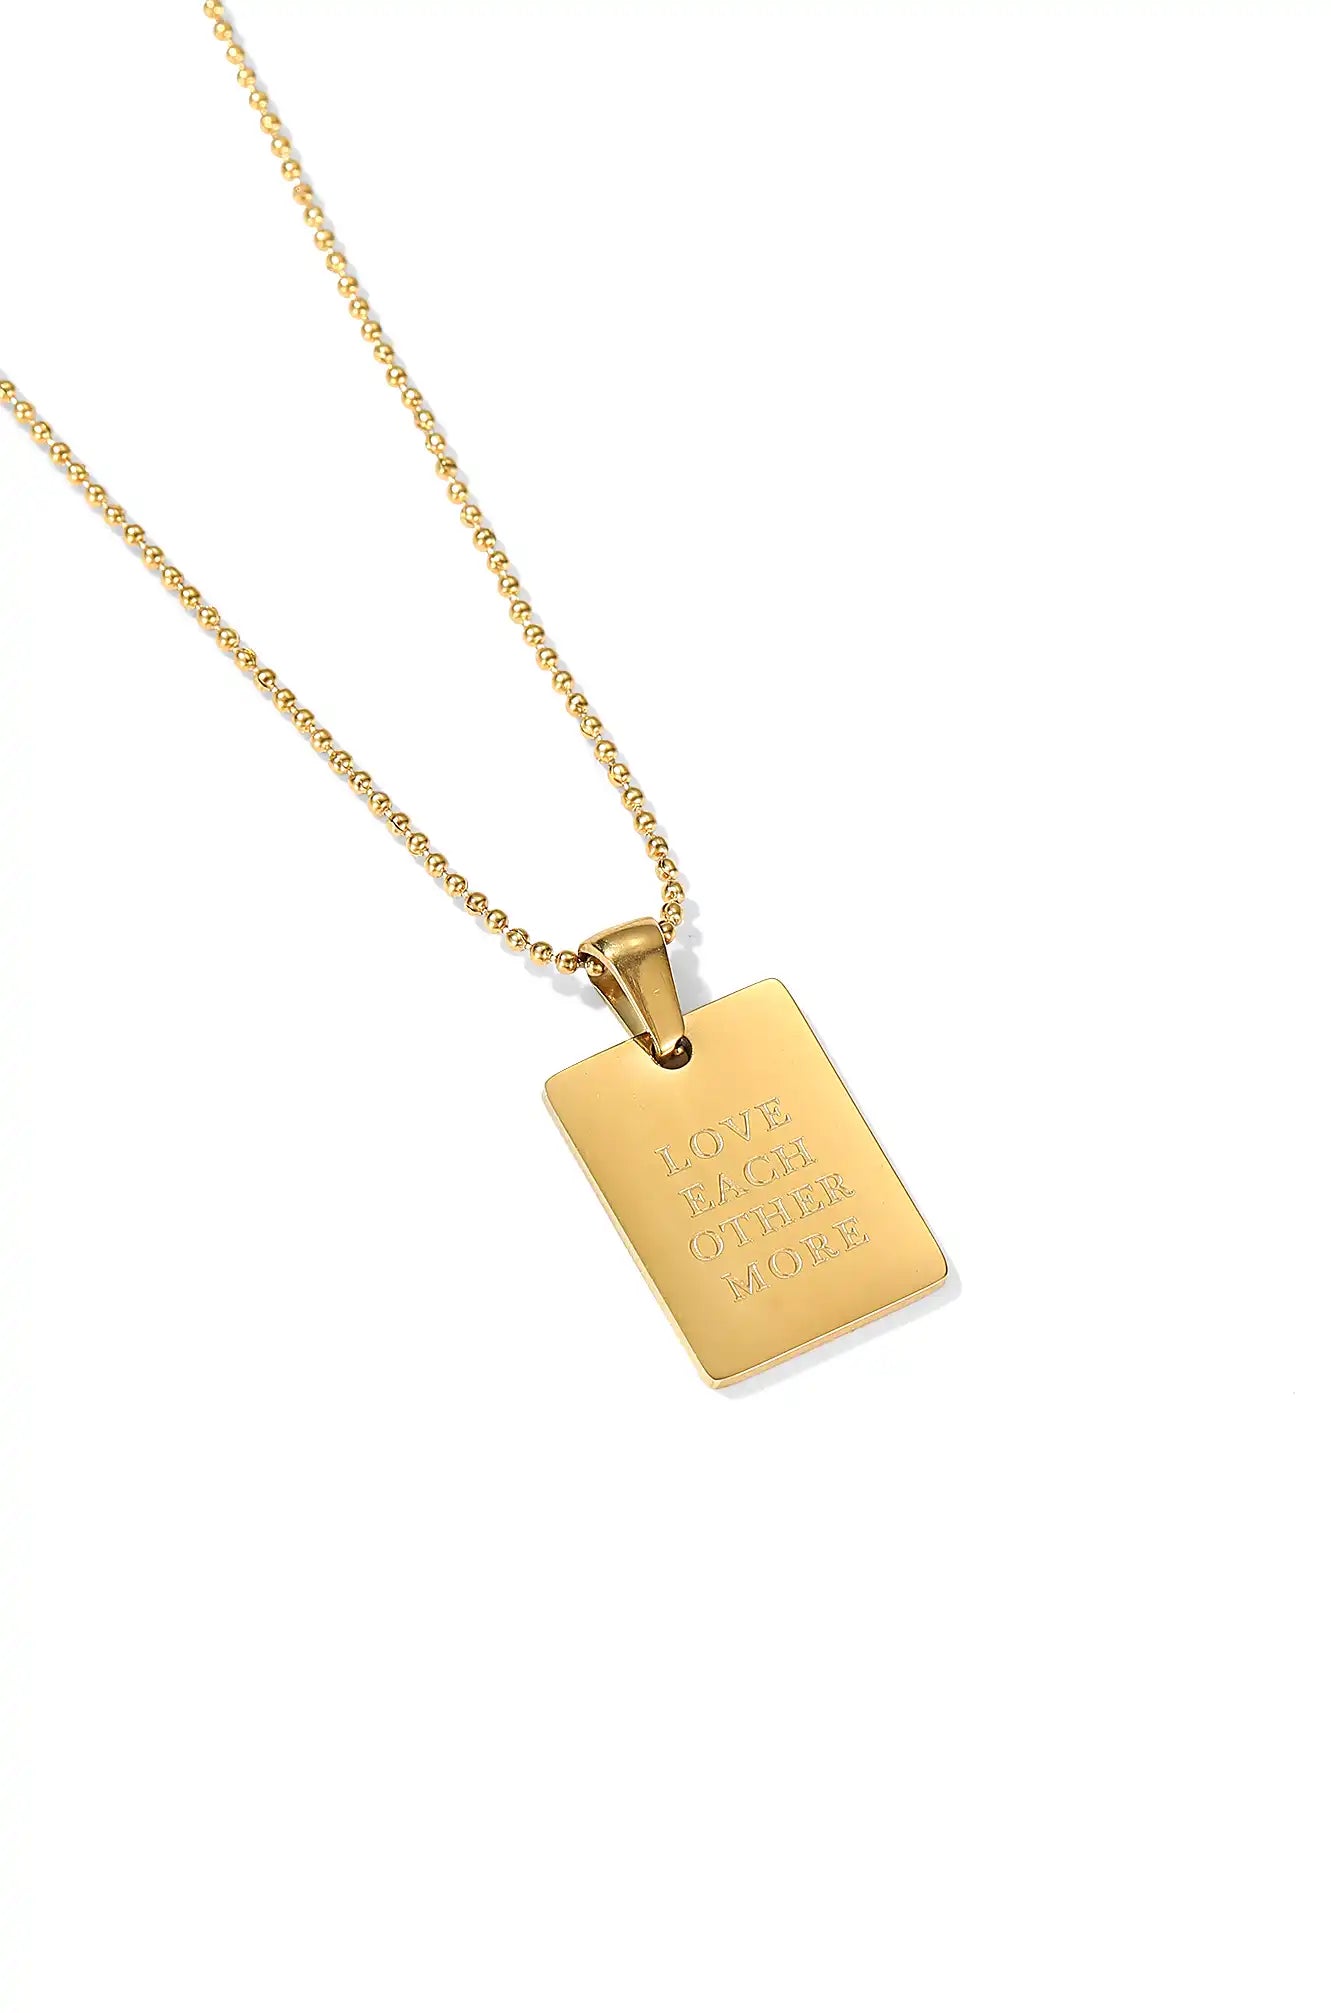 gold necklace with pendant